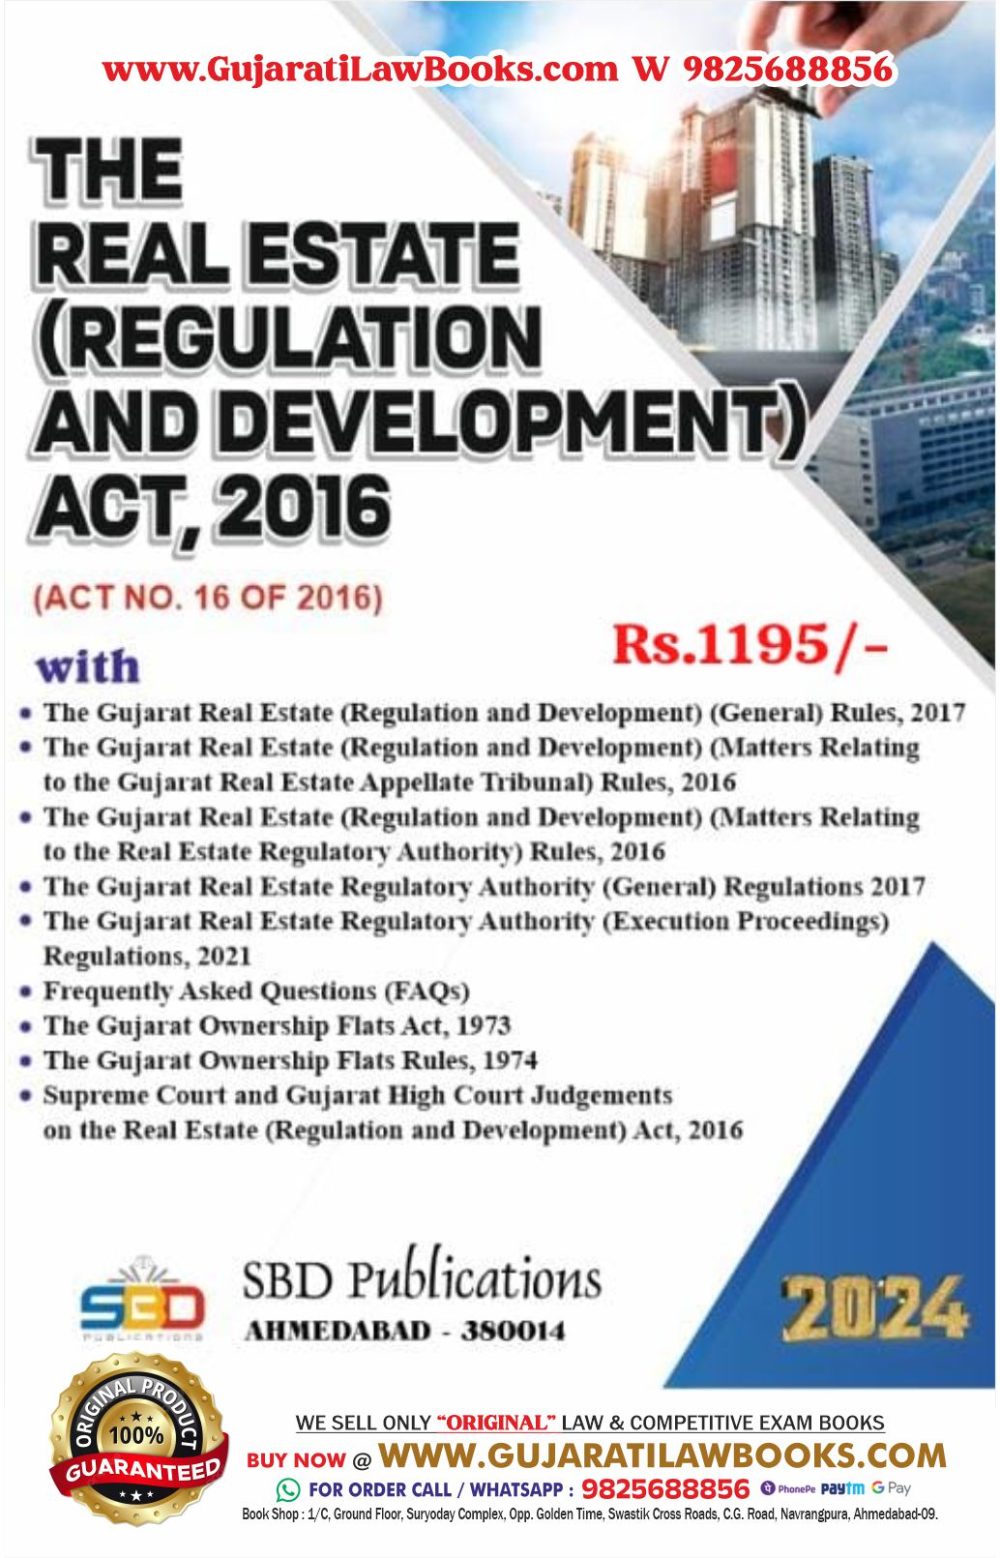 RERA - The Real Estate Regulation and Development Act, 2016 - in English - Latest 2024 Edition SBD